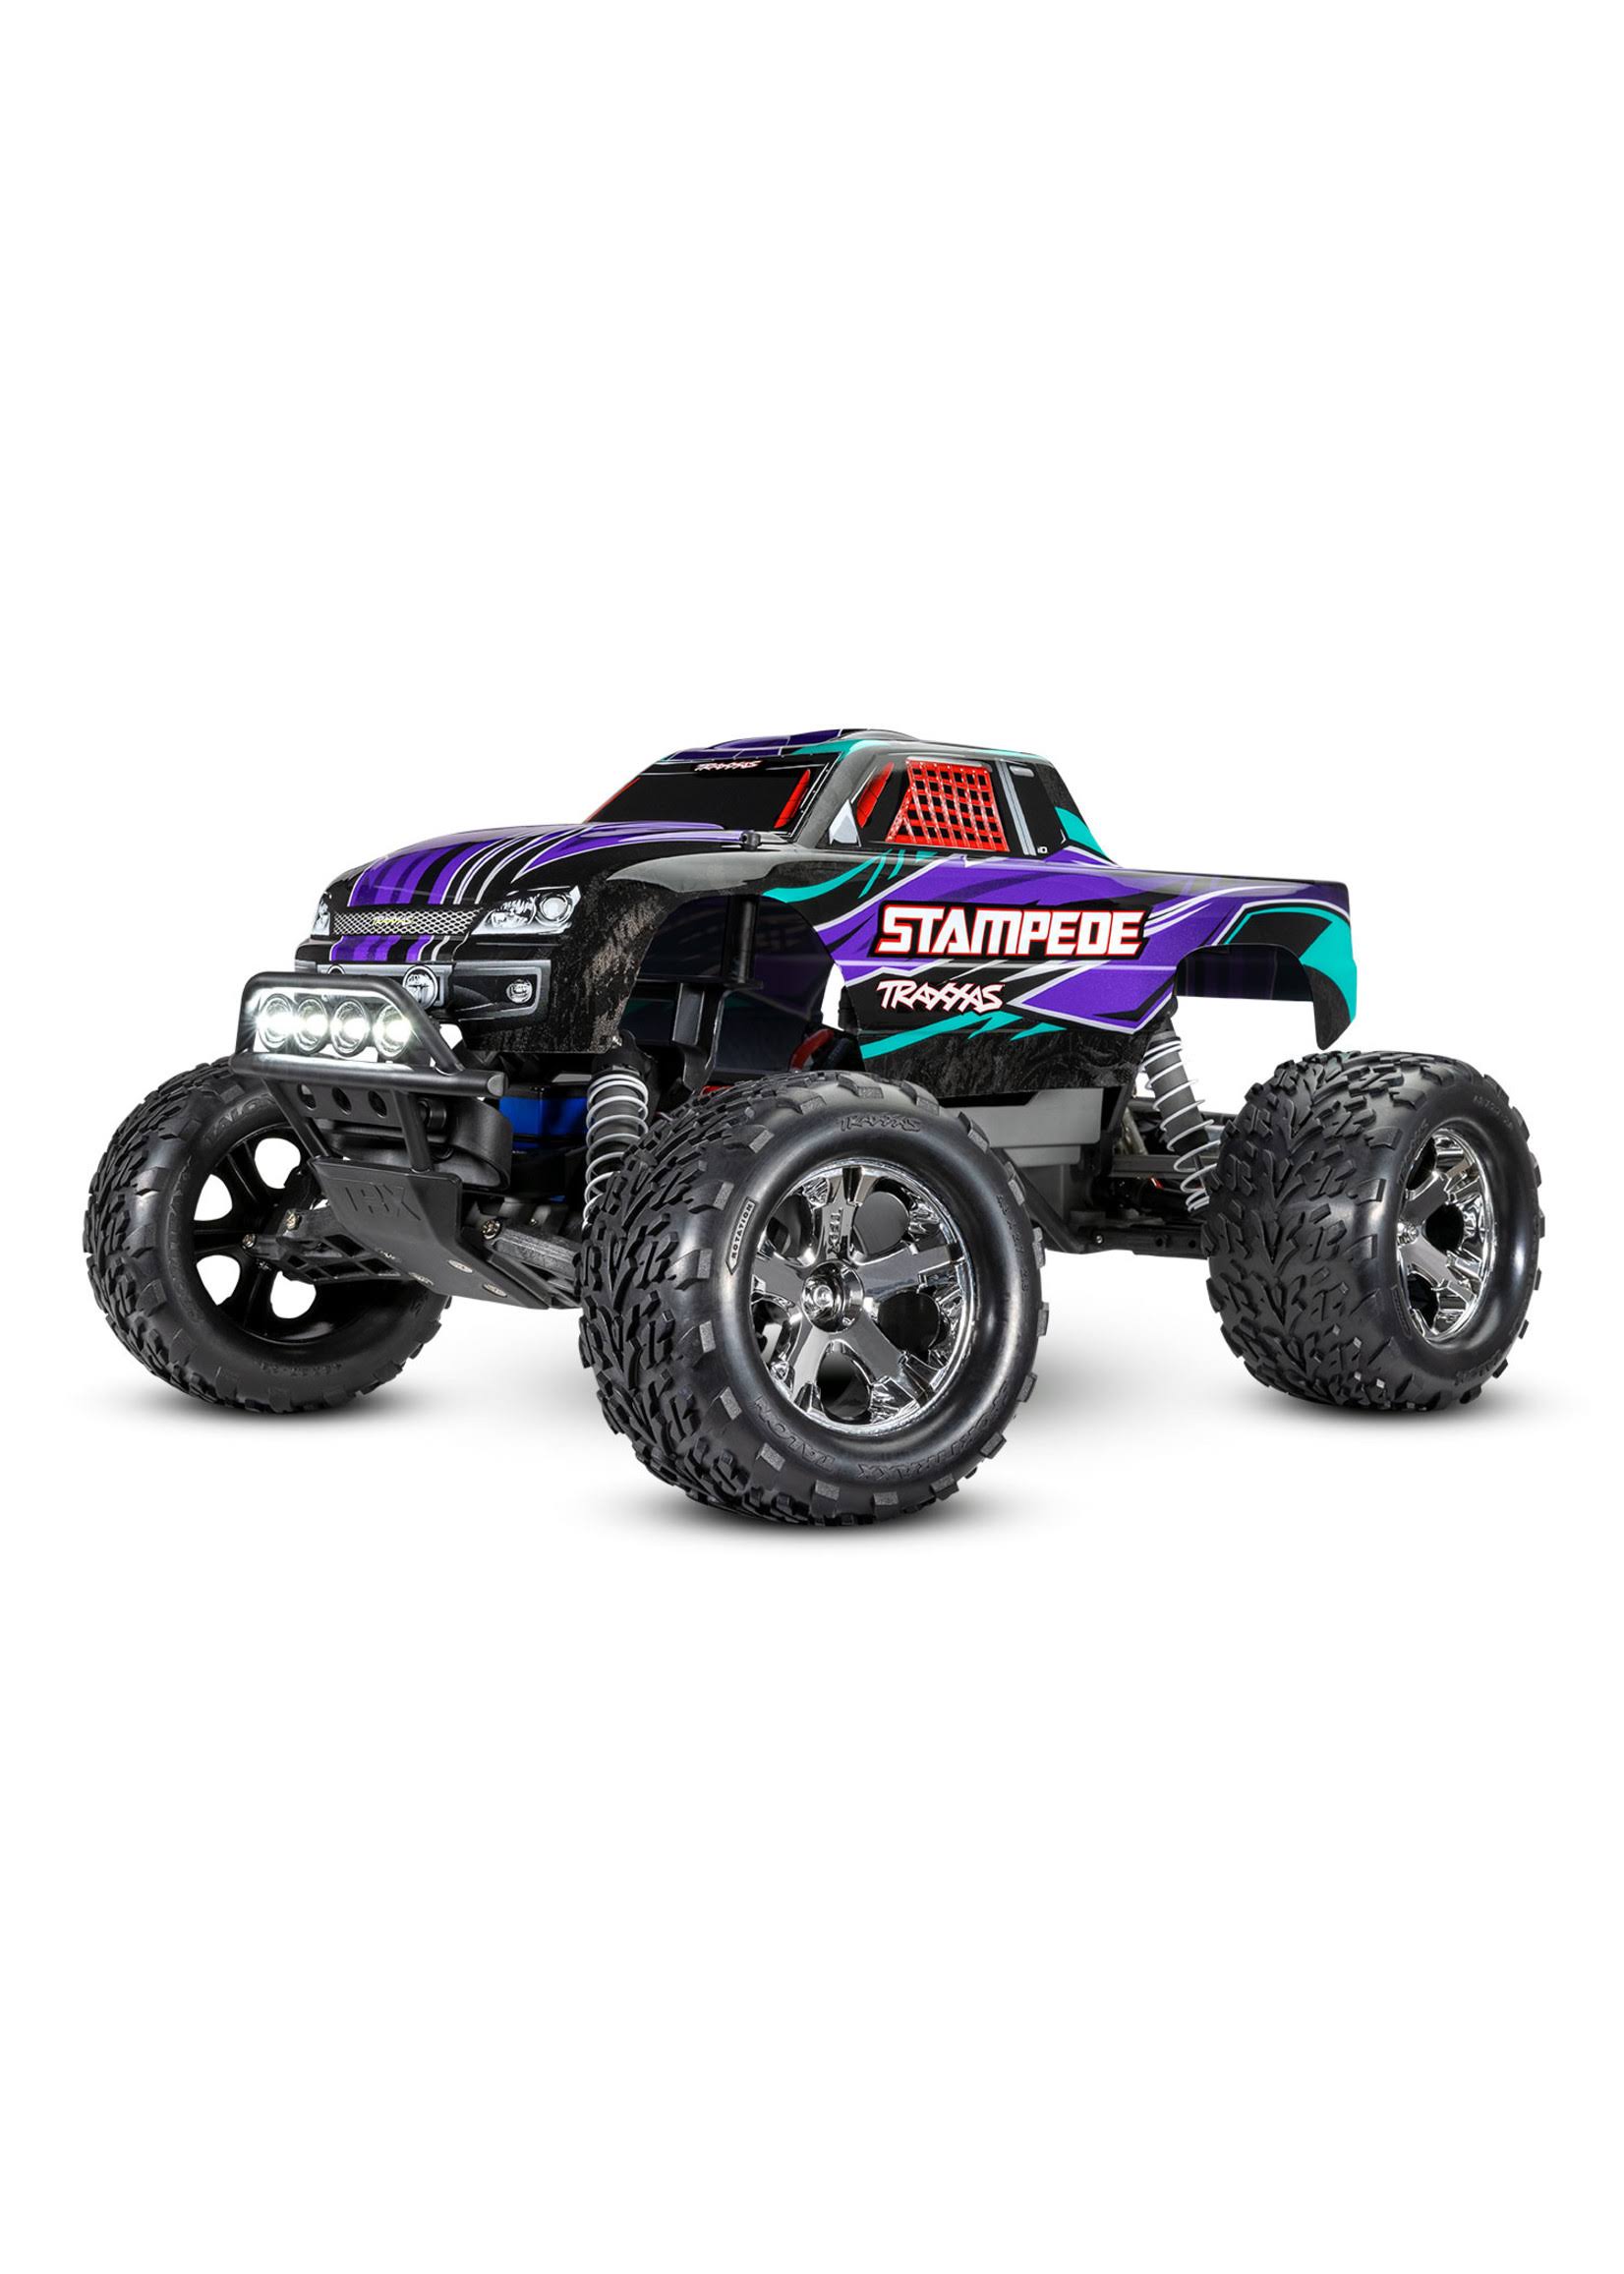 Traxxas Stampede 1/10 2wd XL-5 With Charger Battery & LED Lights Purple